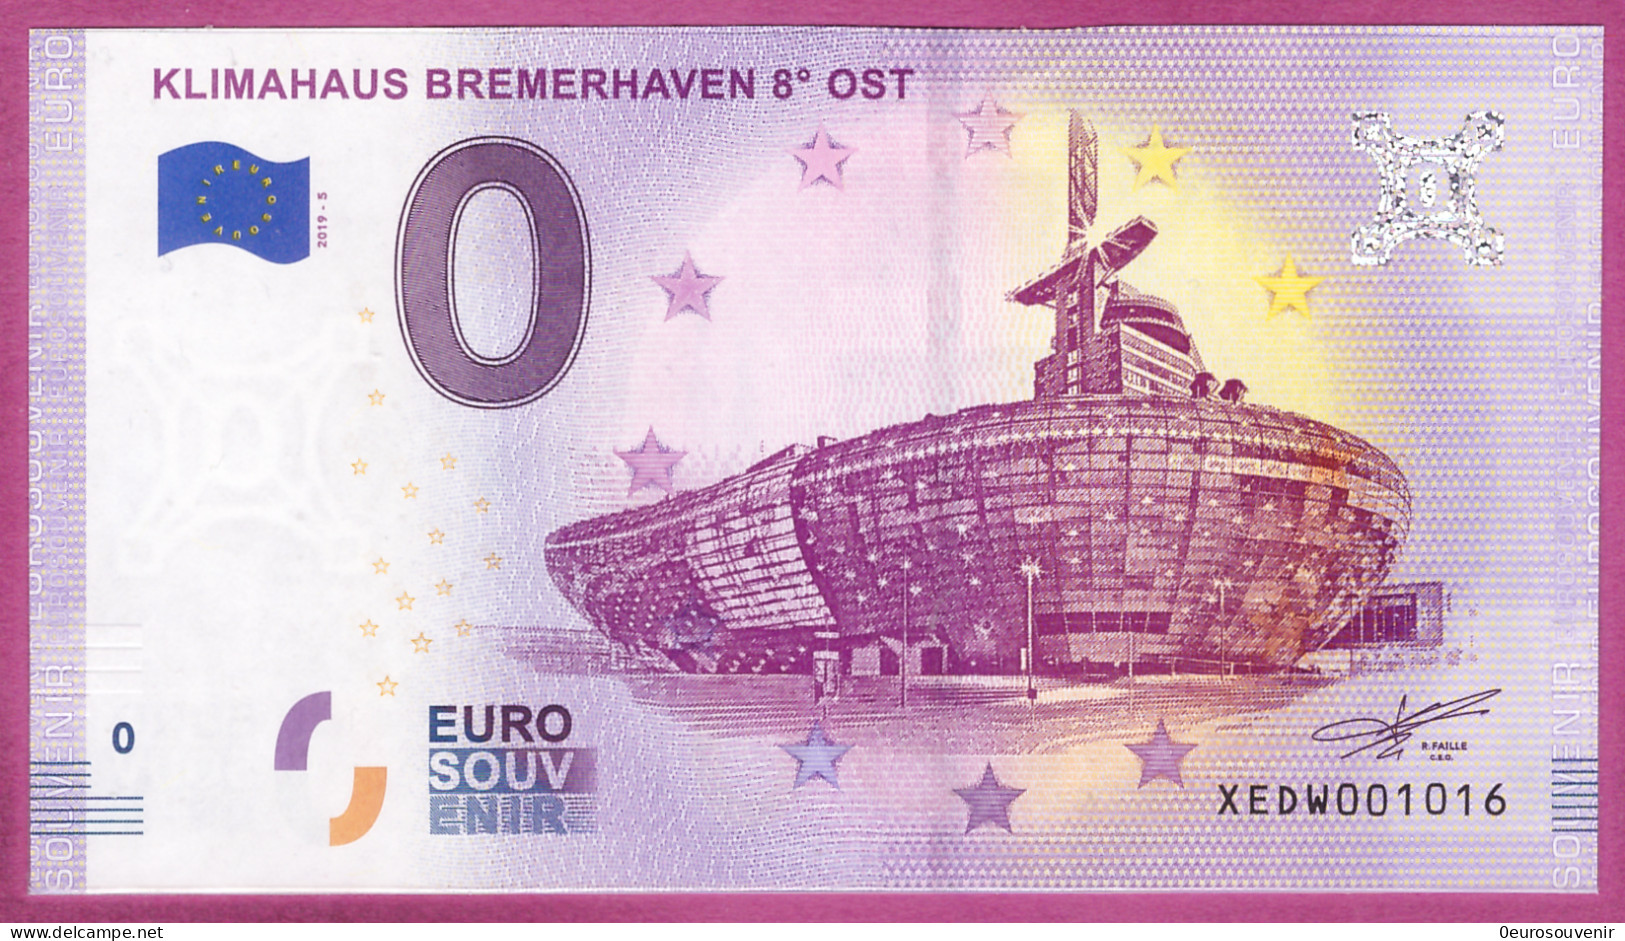 0-Euro XEDW 2019-5 KLIMAHAUS BREMERHAVEN 8° OST - Private Proofs / Unofficial